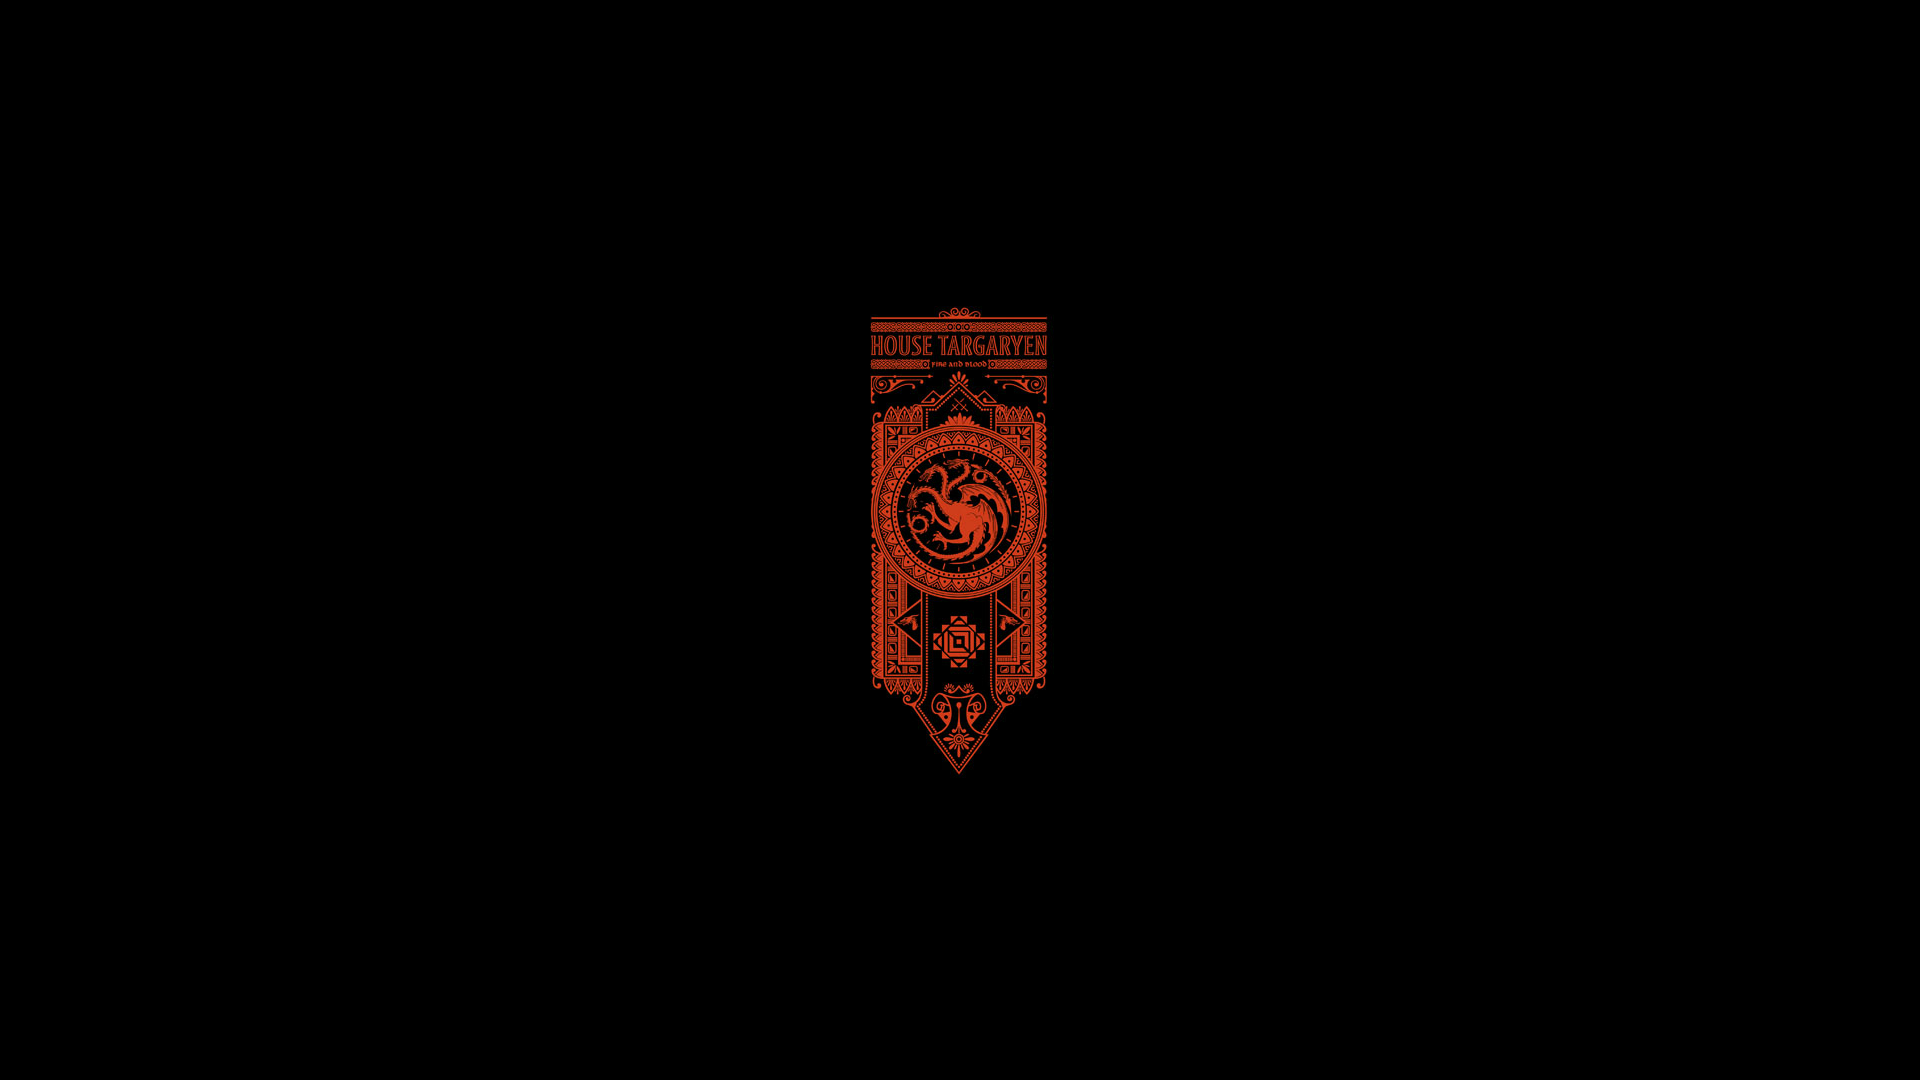 House Targaryen Fire and Blood sigil banner Game of Thrones banners